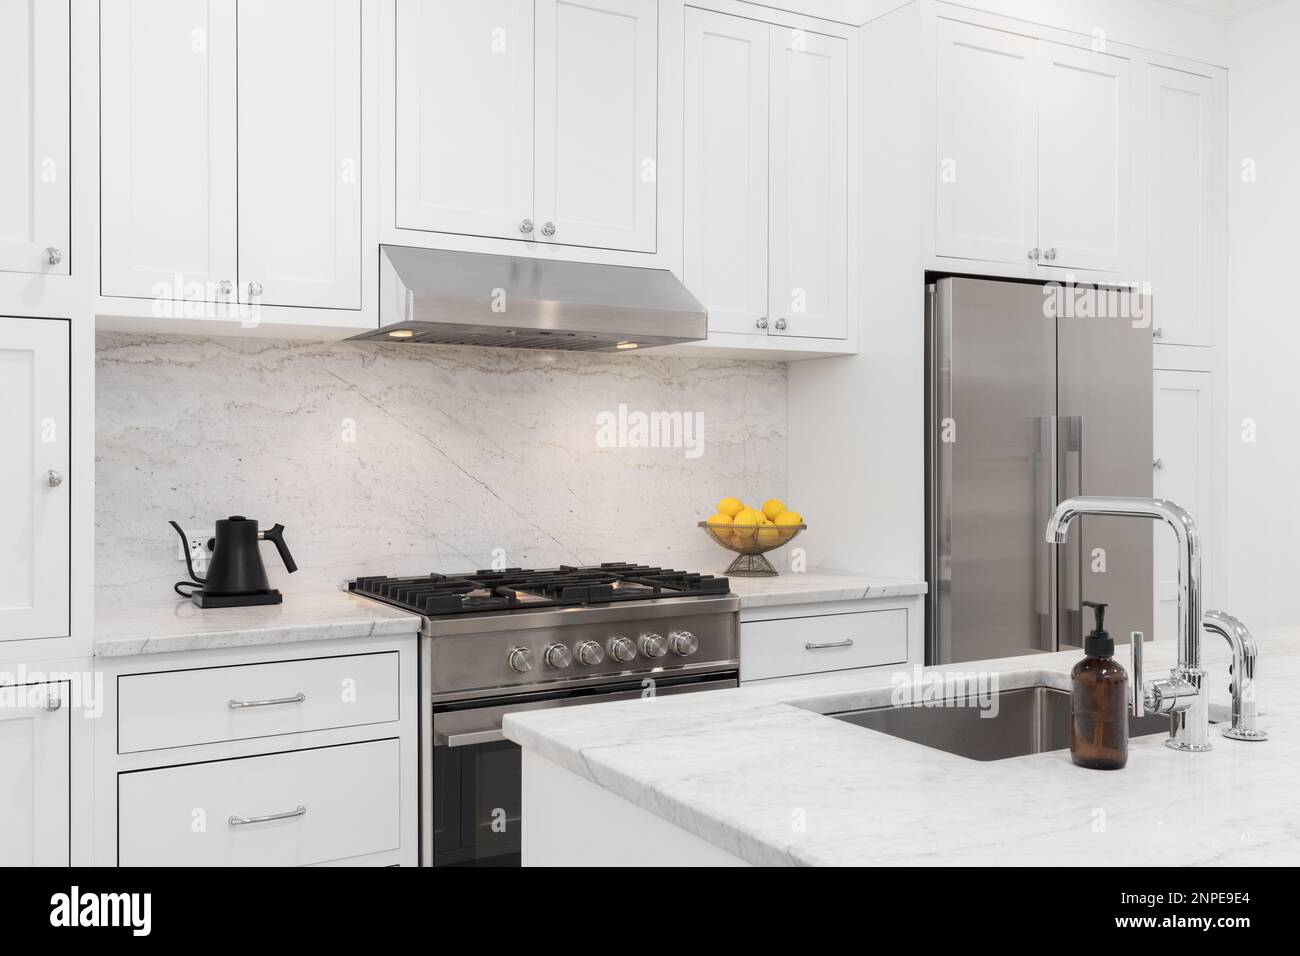 A kitchen detail with white cabinets, stainless steel stove and hood, marble countertops and backsplash, and a chrome sink. Stock Photo